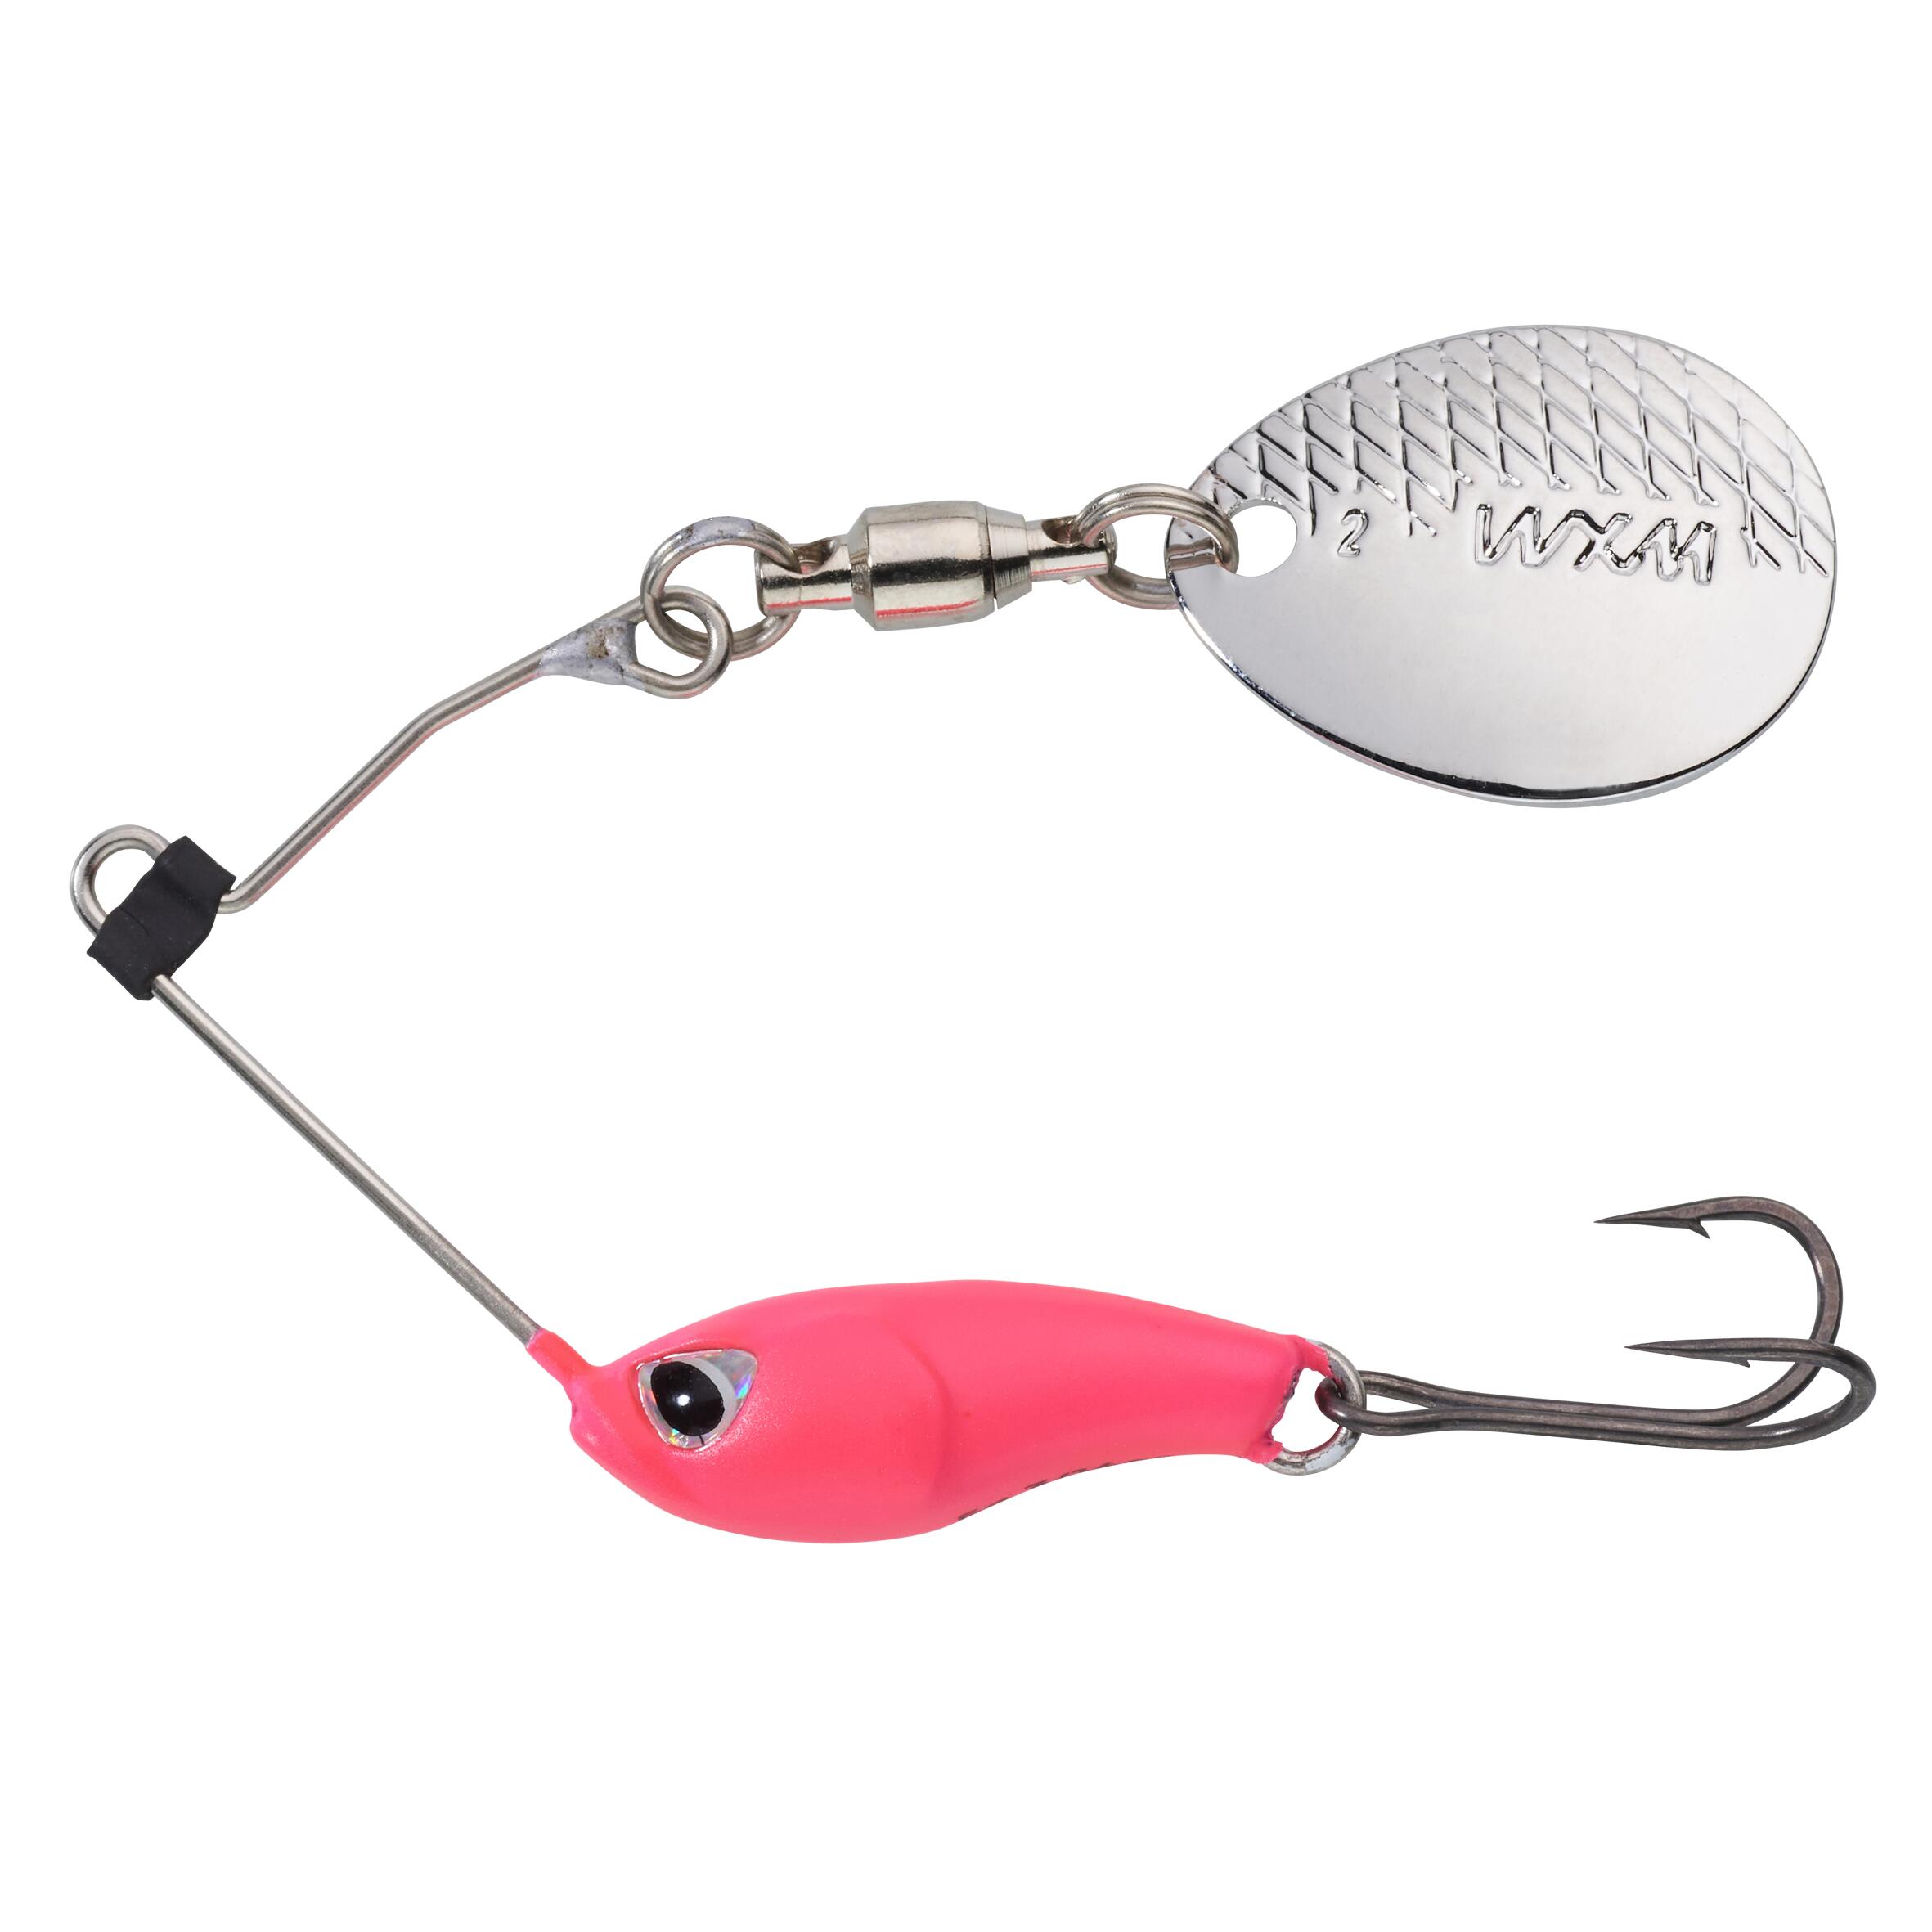 MICRO SPINNERBAIT SPINO MCO 5 G PINK CAPERLAN